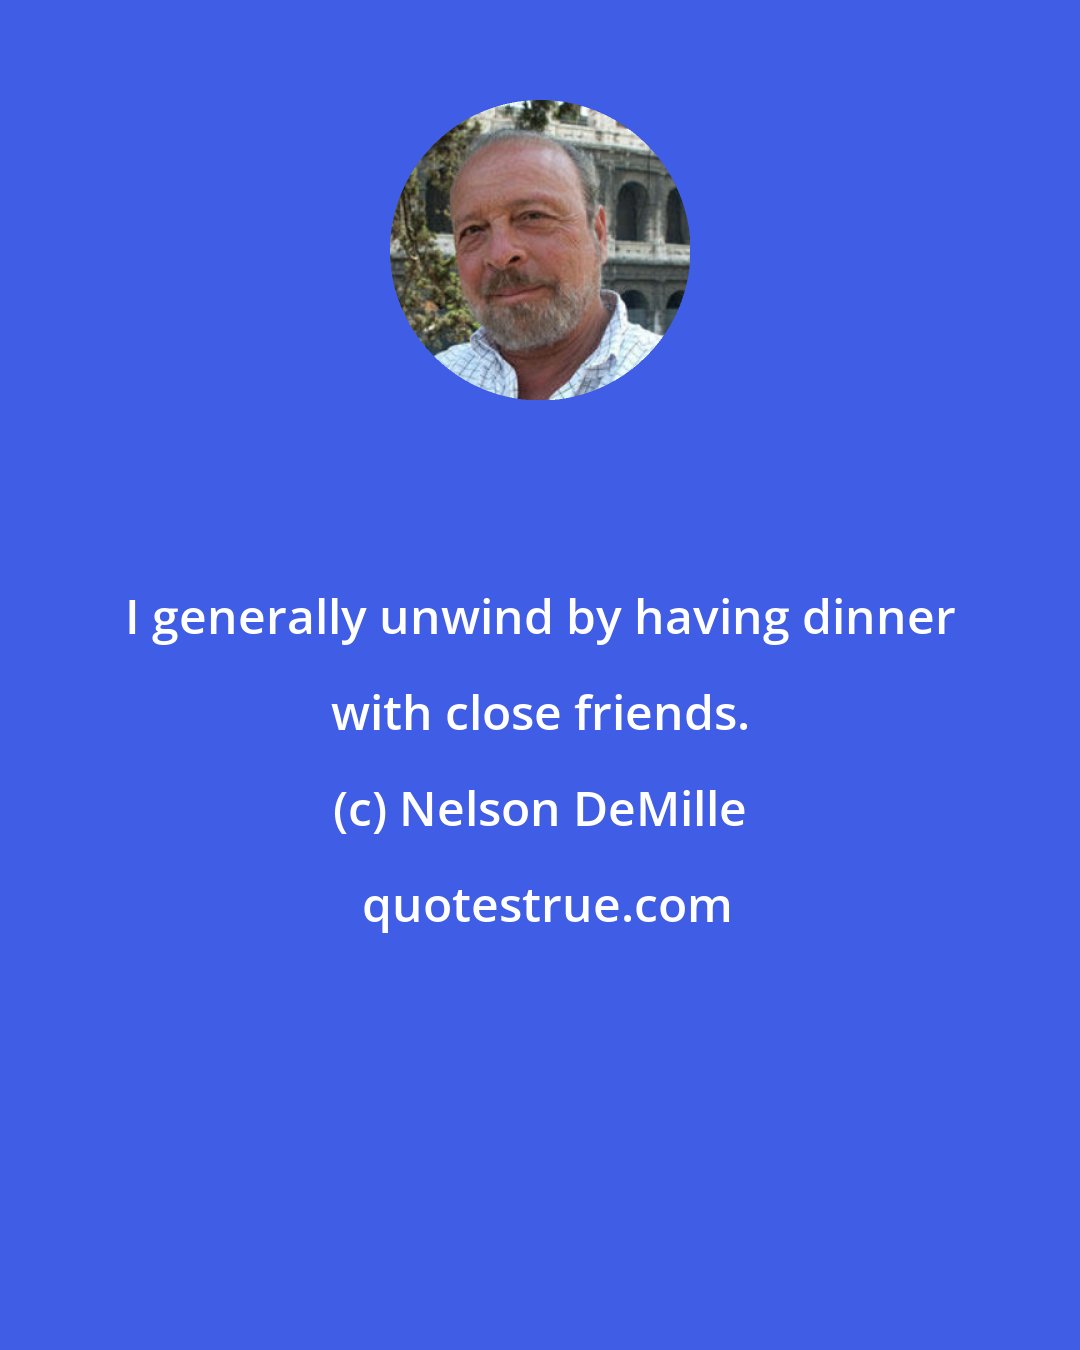 Nelson DeMille: I generally unwind by having dinner with close friends.